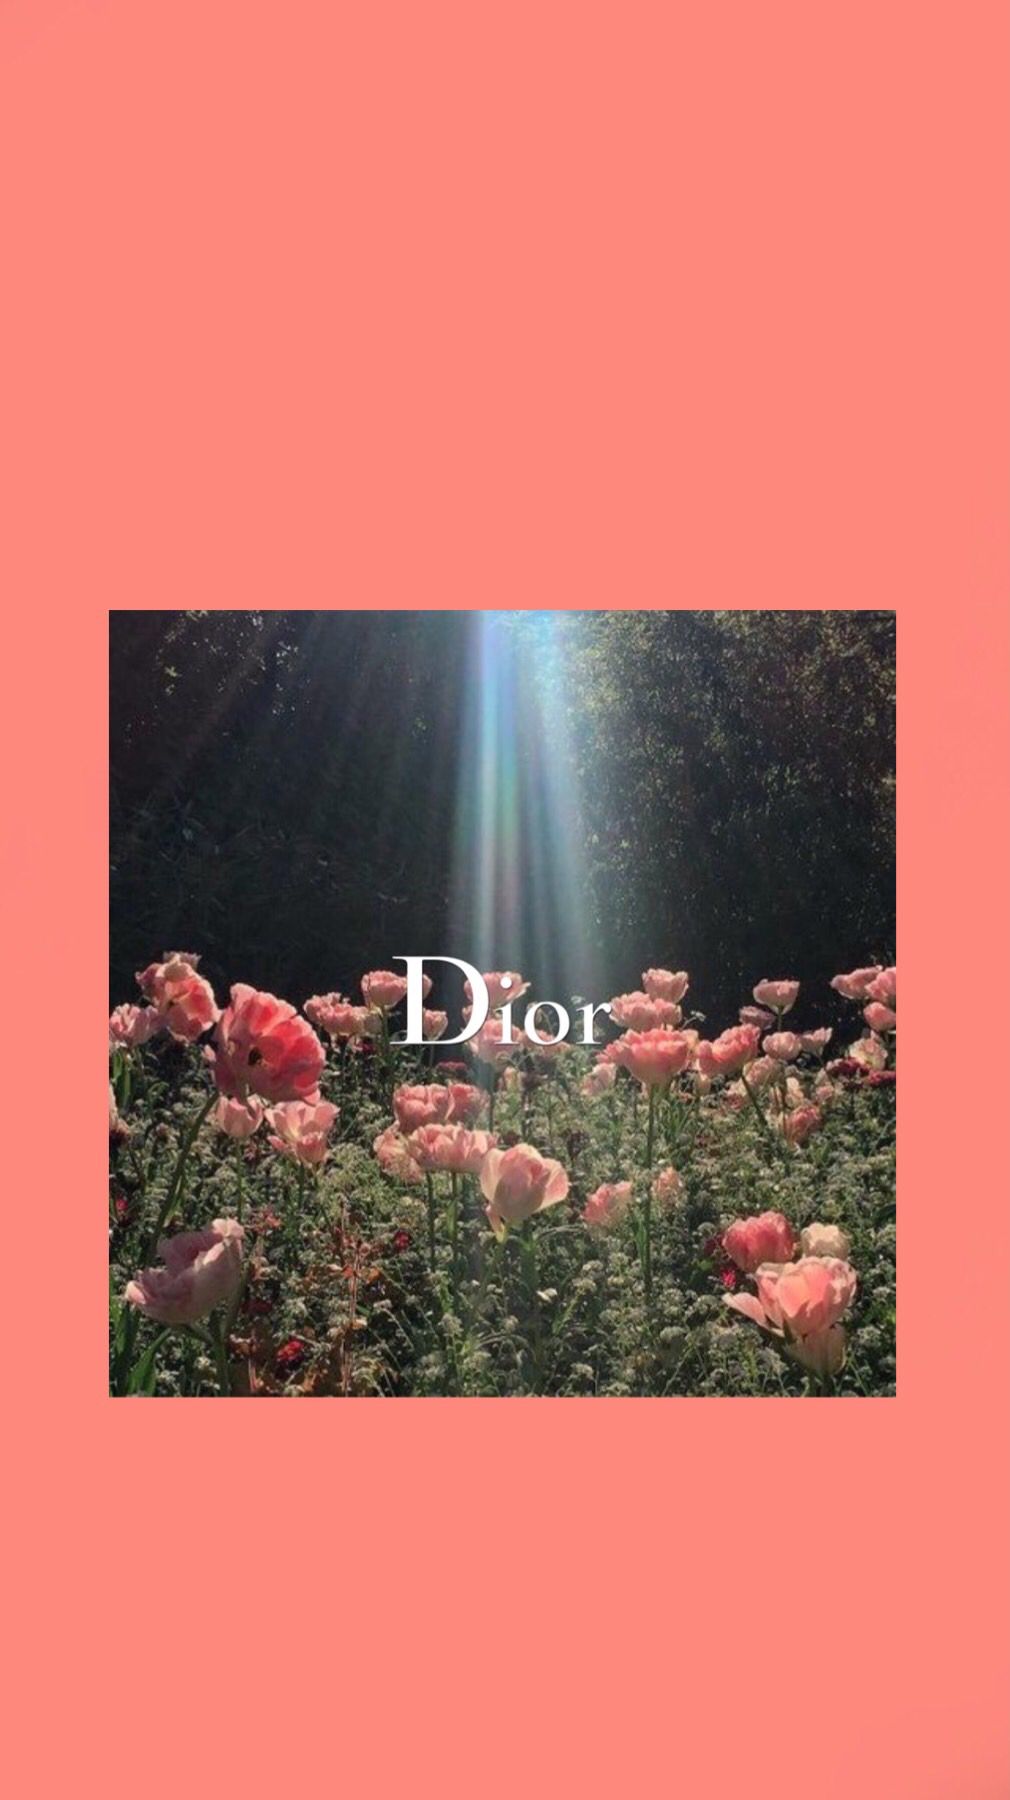 Dior wallpaper I made! Credit to the artist - Dior